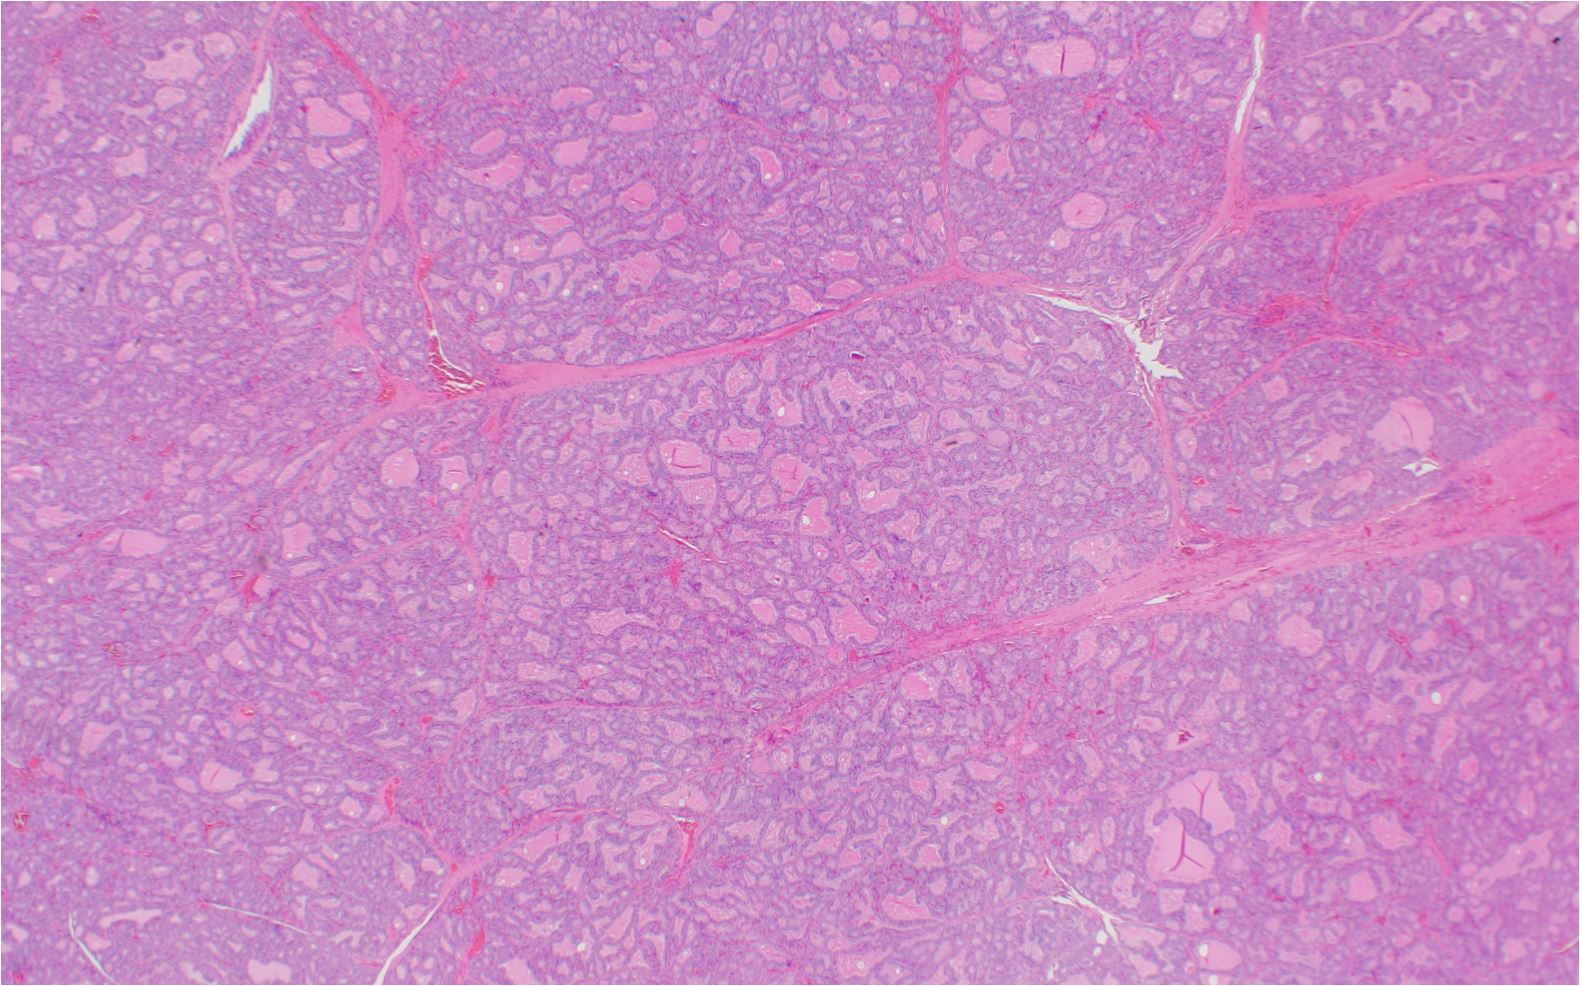 Diffuse folllicular hyperplasia without inflammatory infiltrate clinically associated with graves disease